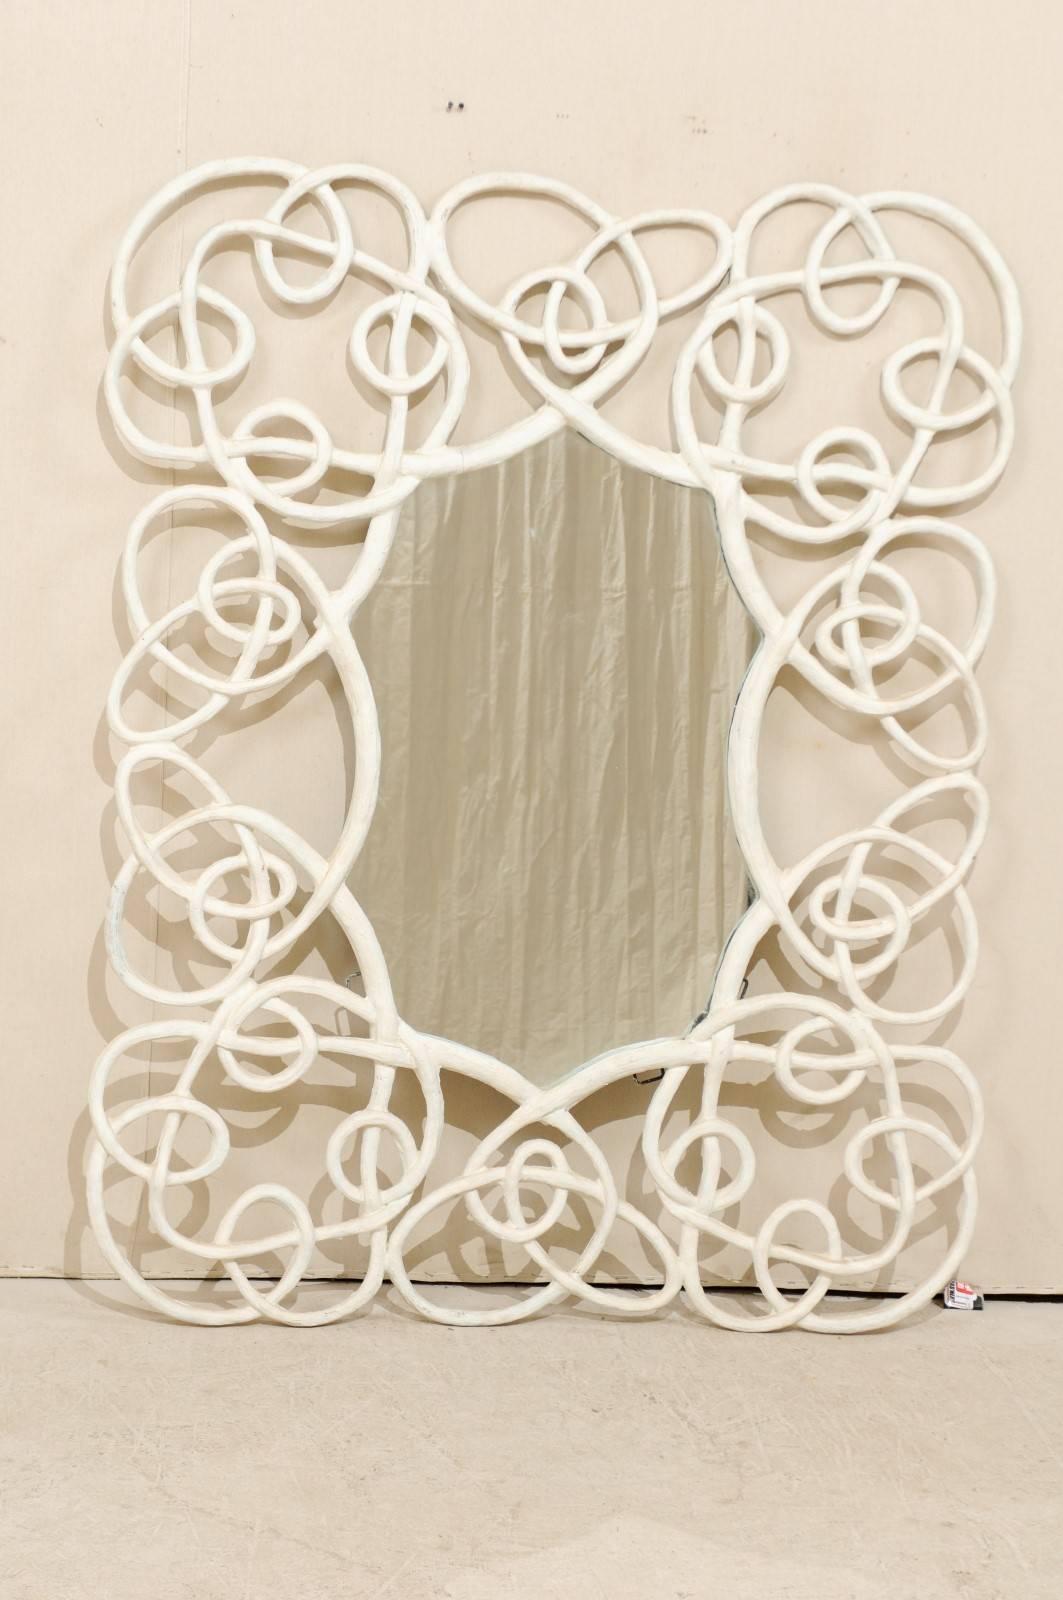 A large modern mirror. This mirror features a twisted, vine like surround which has been painted an off-white color. It is made of a composite material with a custom finish and has an overall rectangular shape. This whimsical mirror would be great